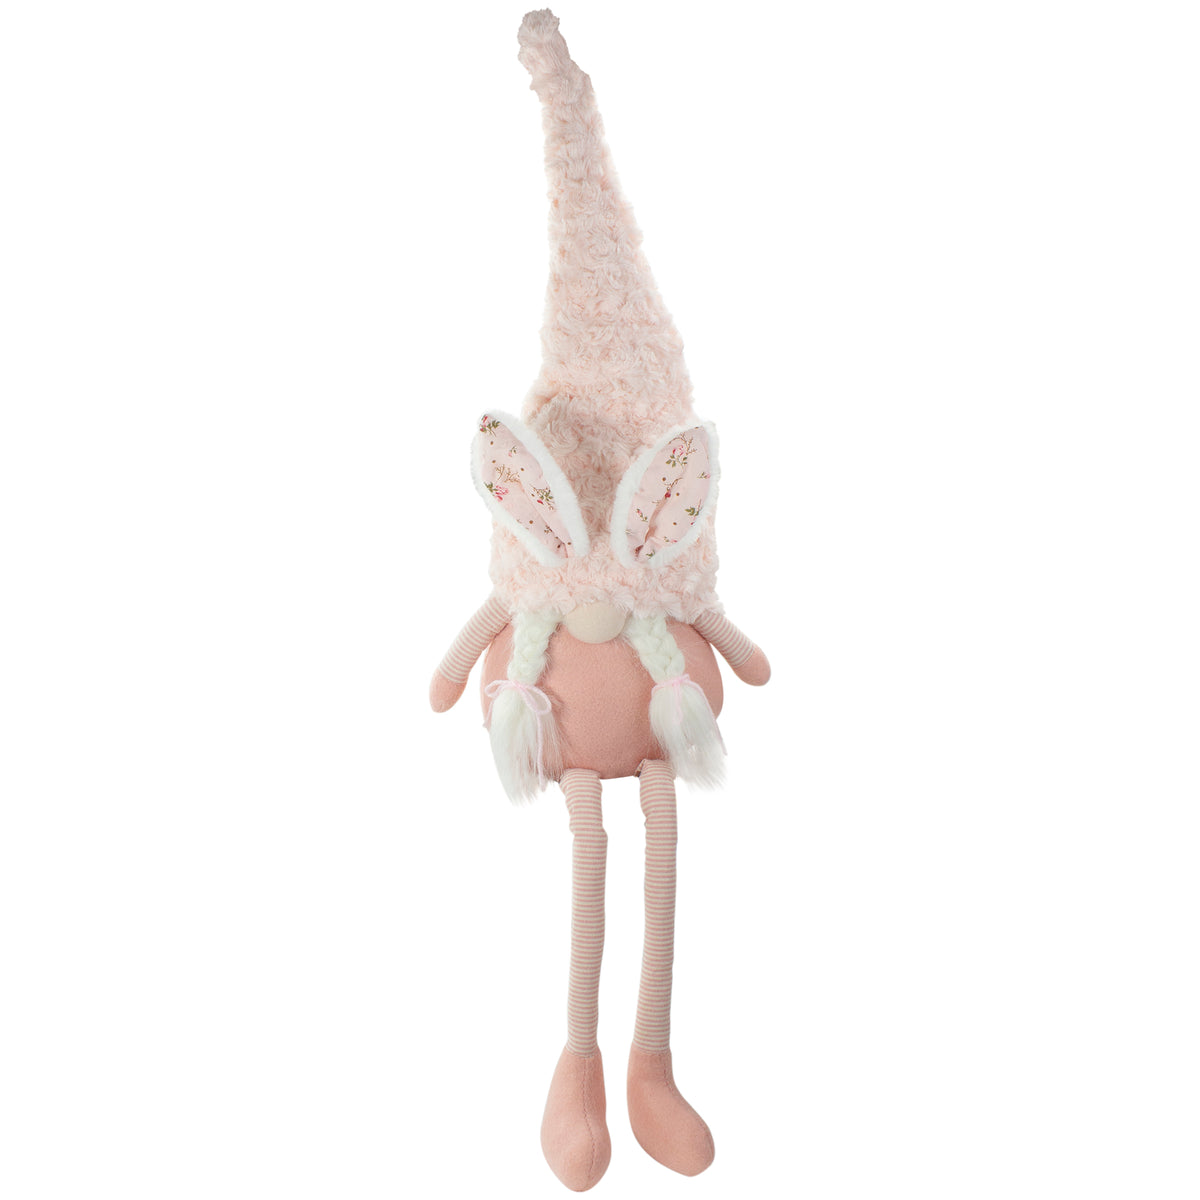 Sitting Easter Gnome with Bunny Ears & Dangling Legs, 32"